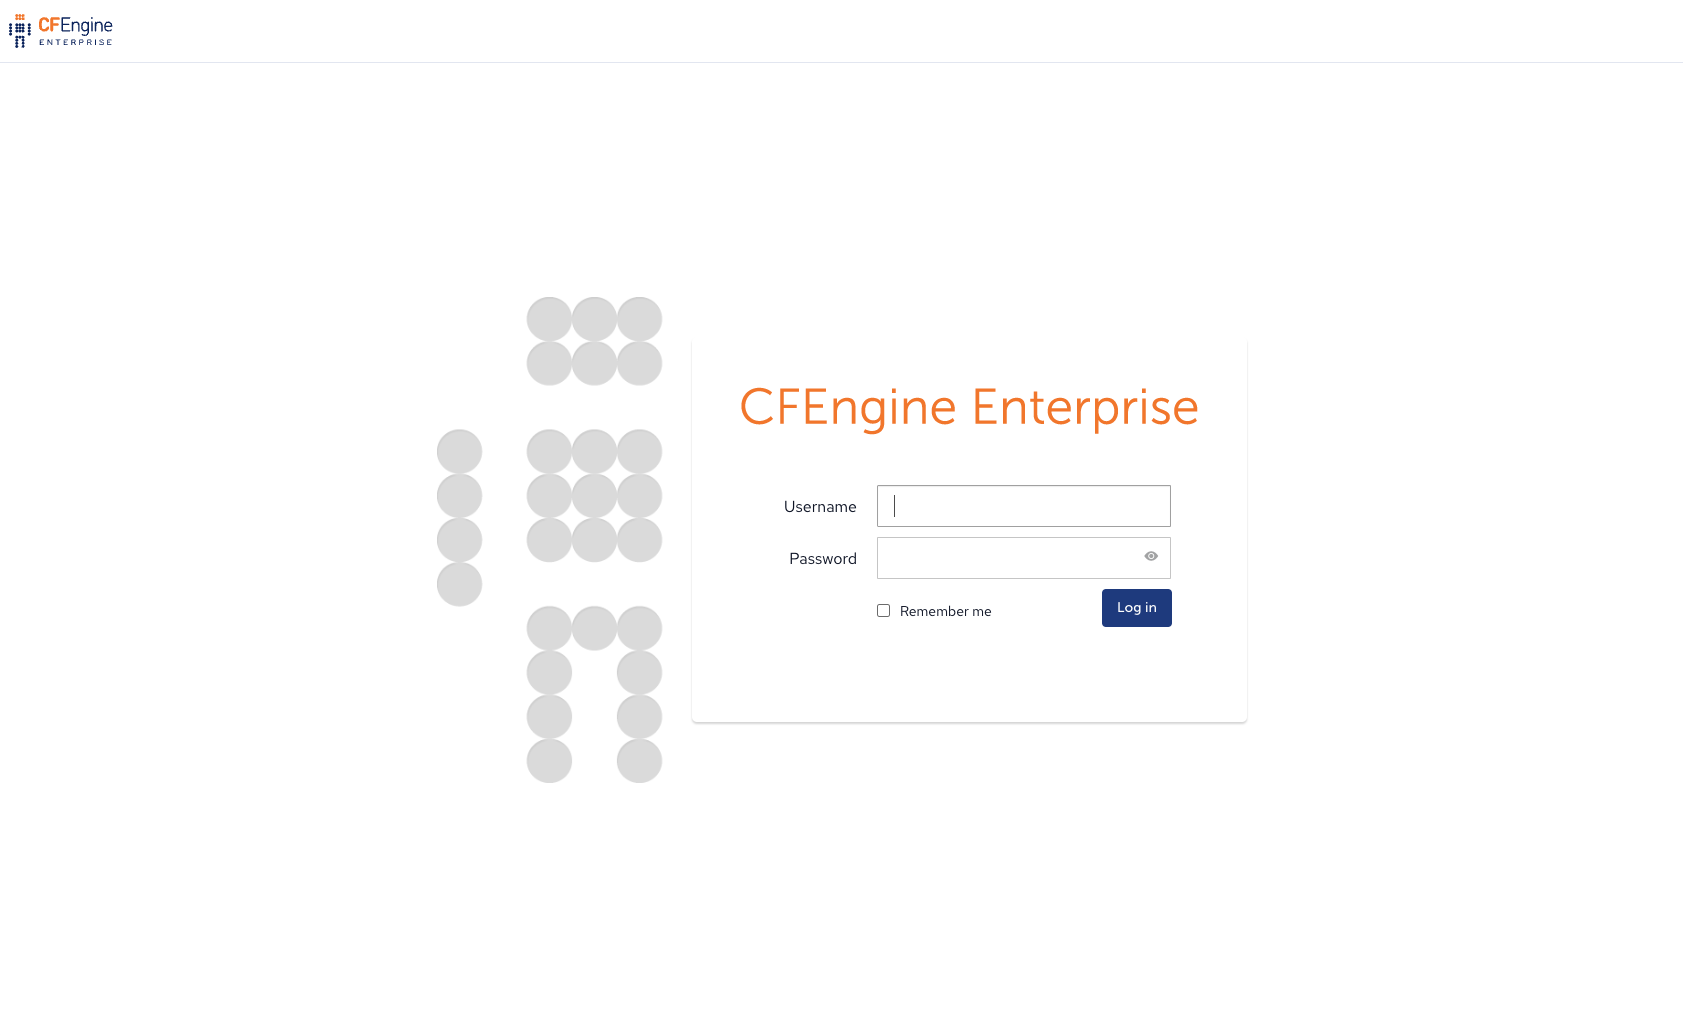 Screenshot of the Mission Portal login screen. Header says CFEngine Enterprise, there are fields for username and password, a Remember me checkbox, and a Log in button.